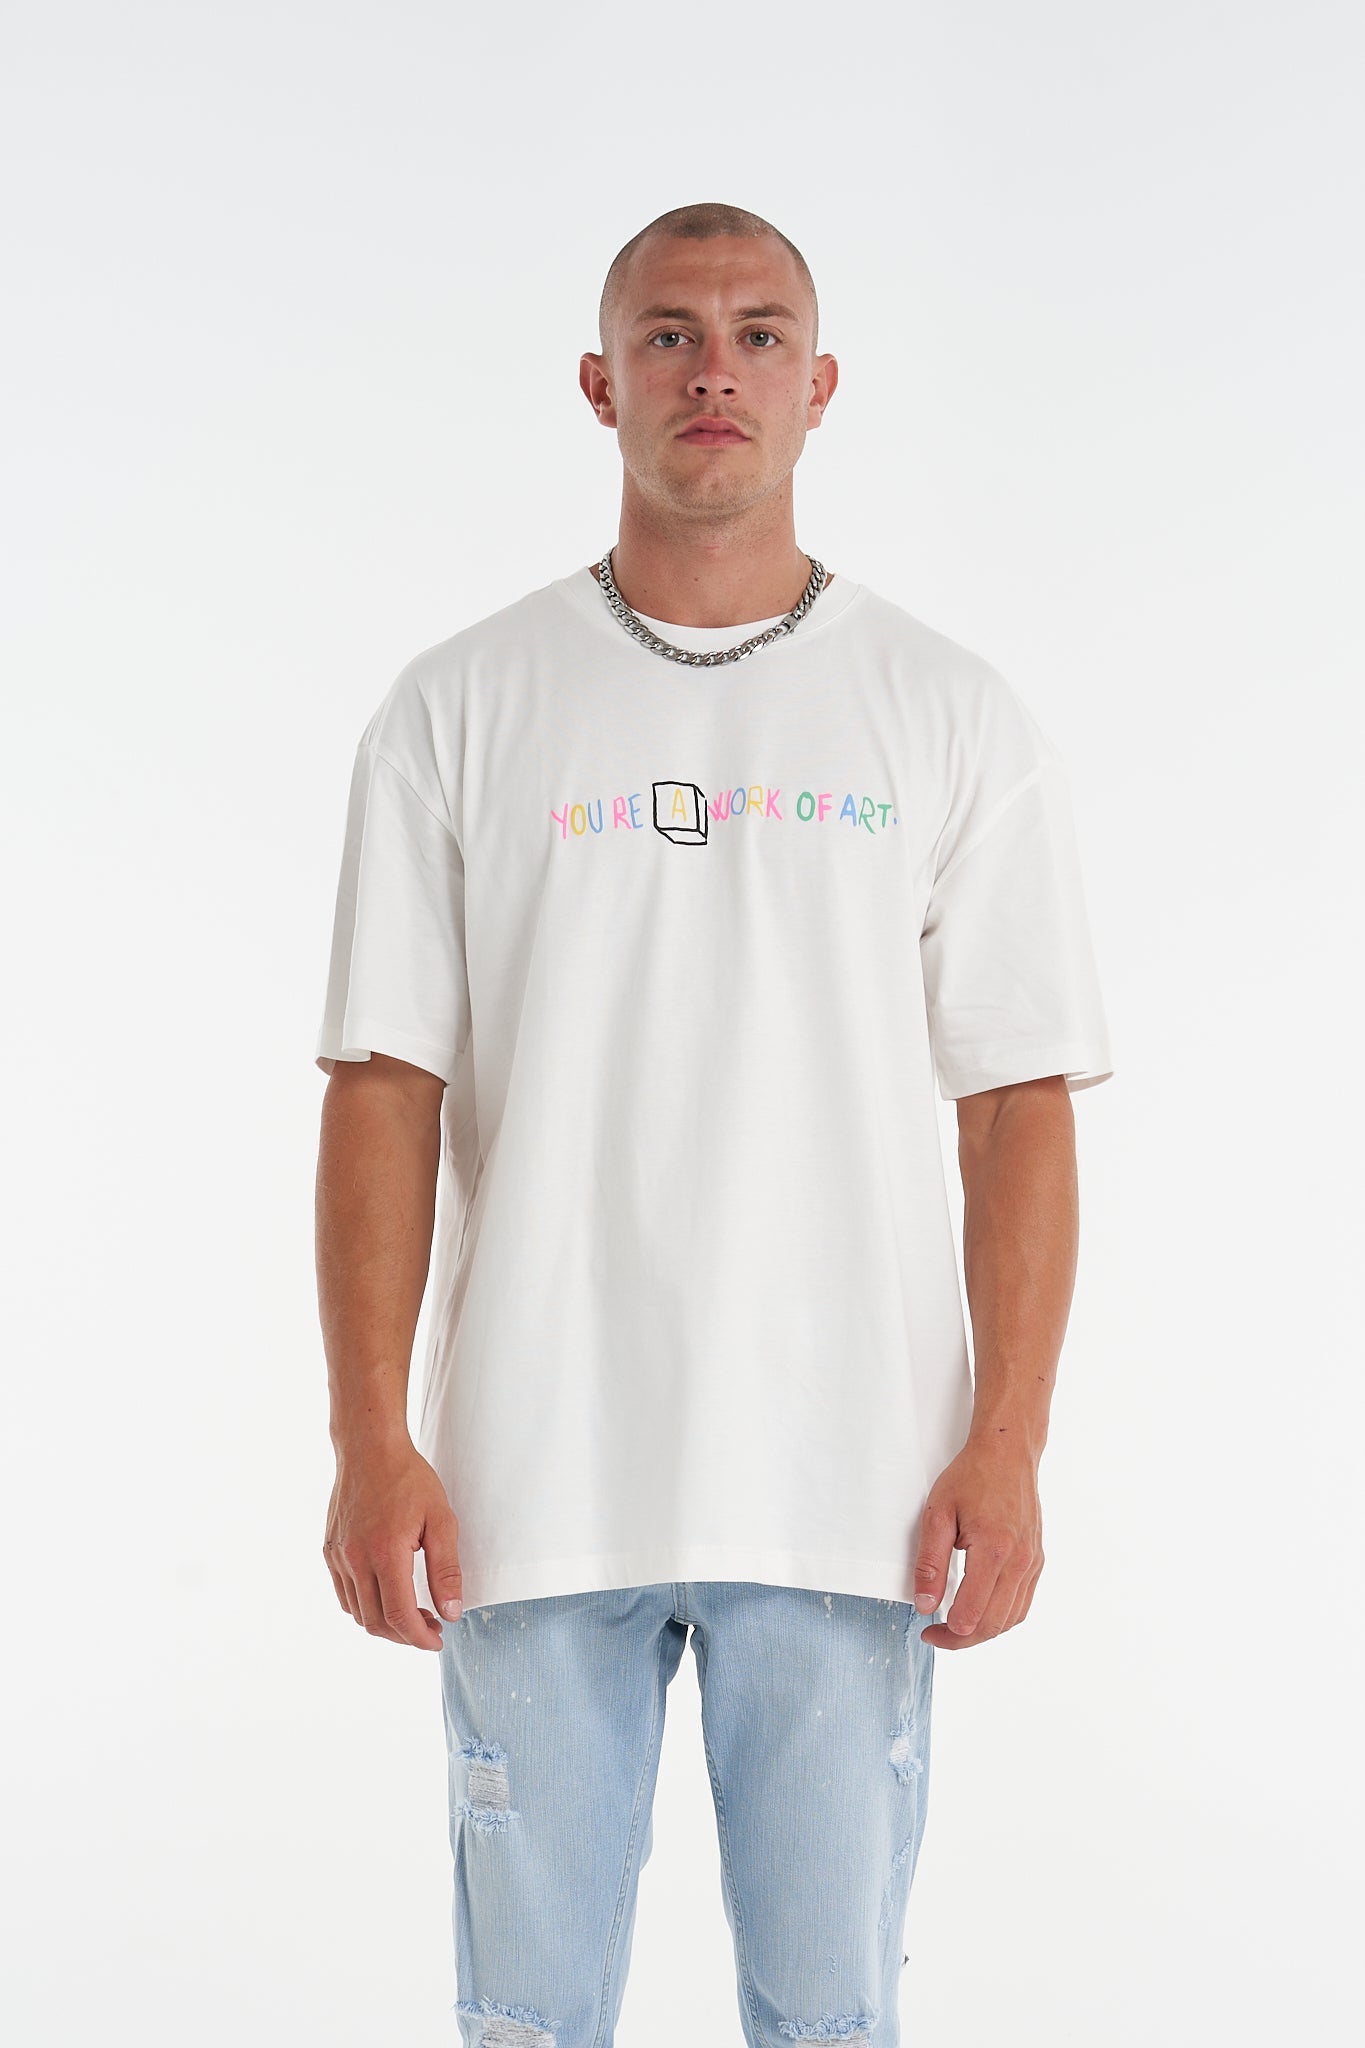 Wild Thoughts Relaxed Tee White - UNEFFECTED STUDIOS® - Shirts & Tops - UNEFFECTED STUDIOS®